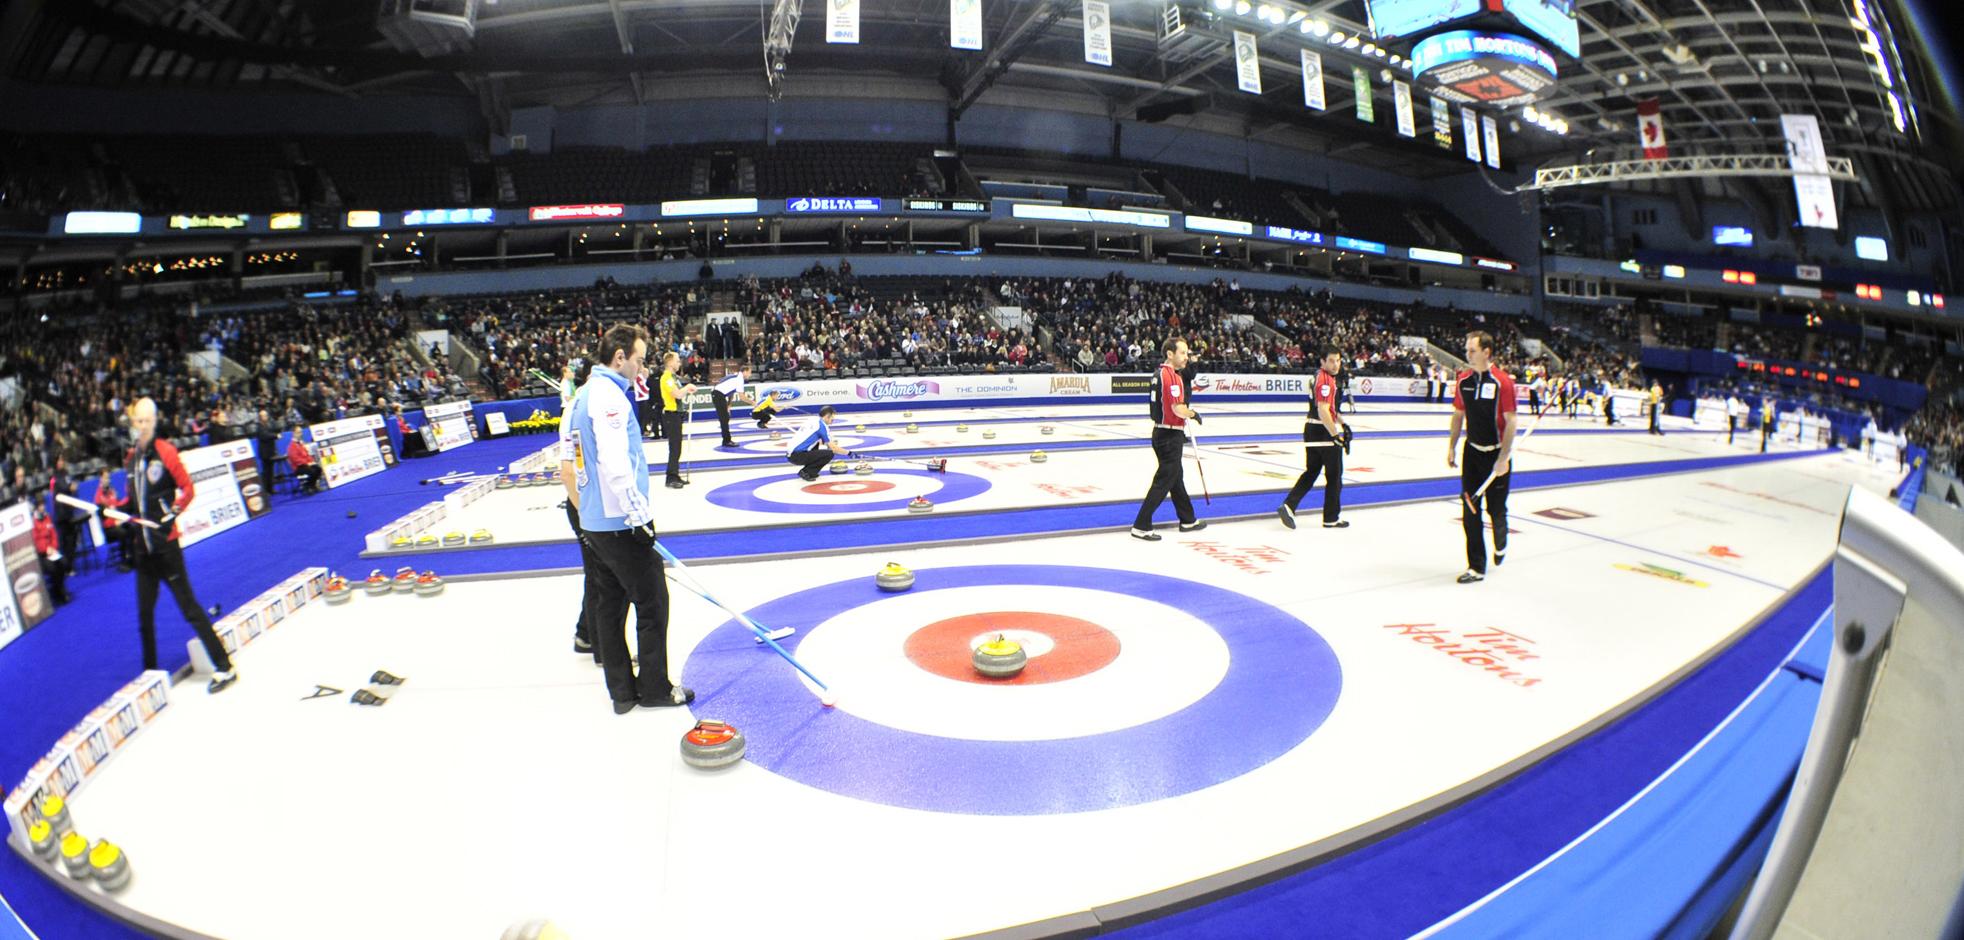 Athletes participating at the 2011 Brier in London, ON